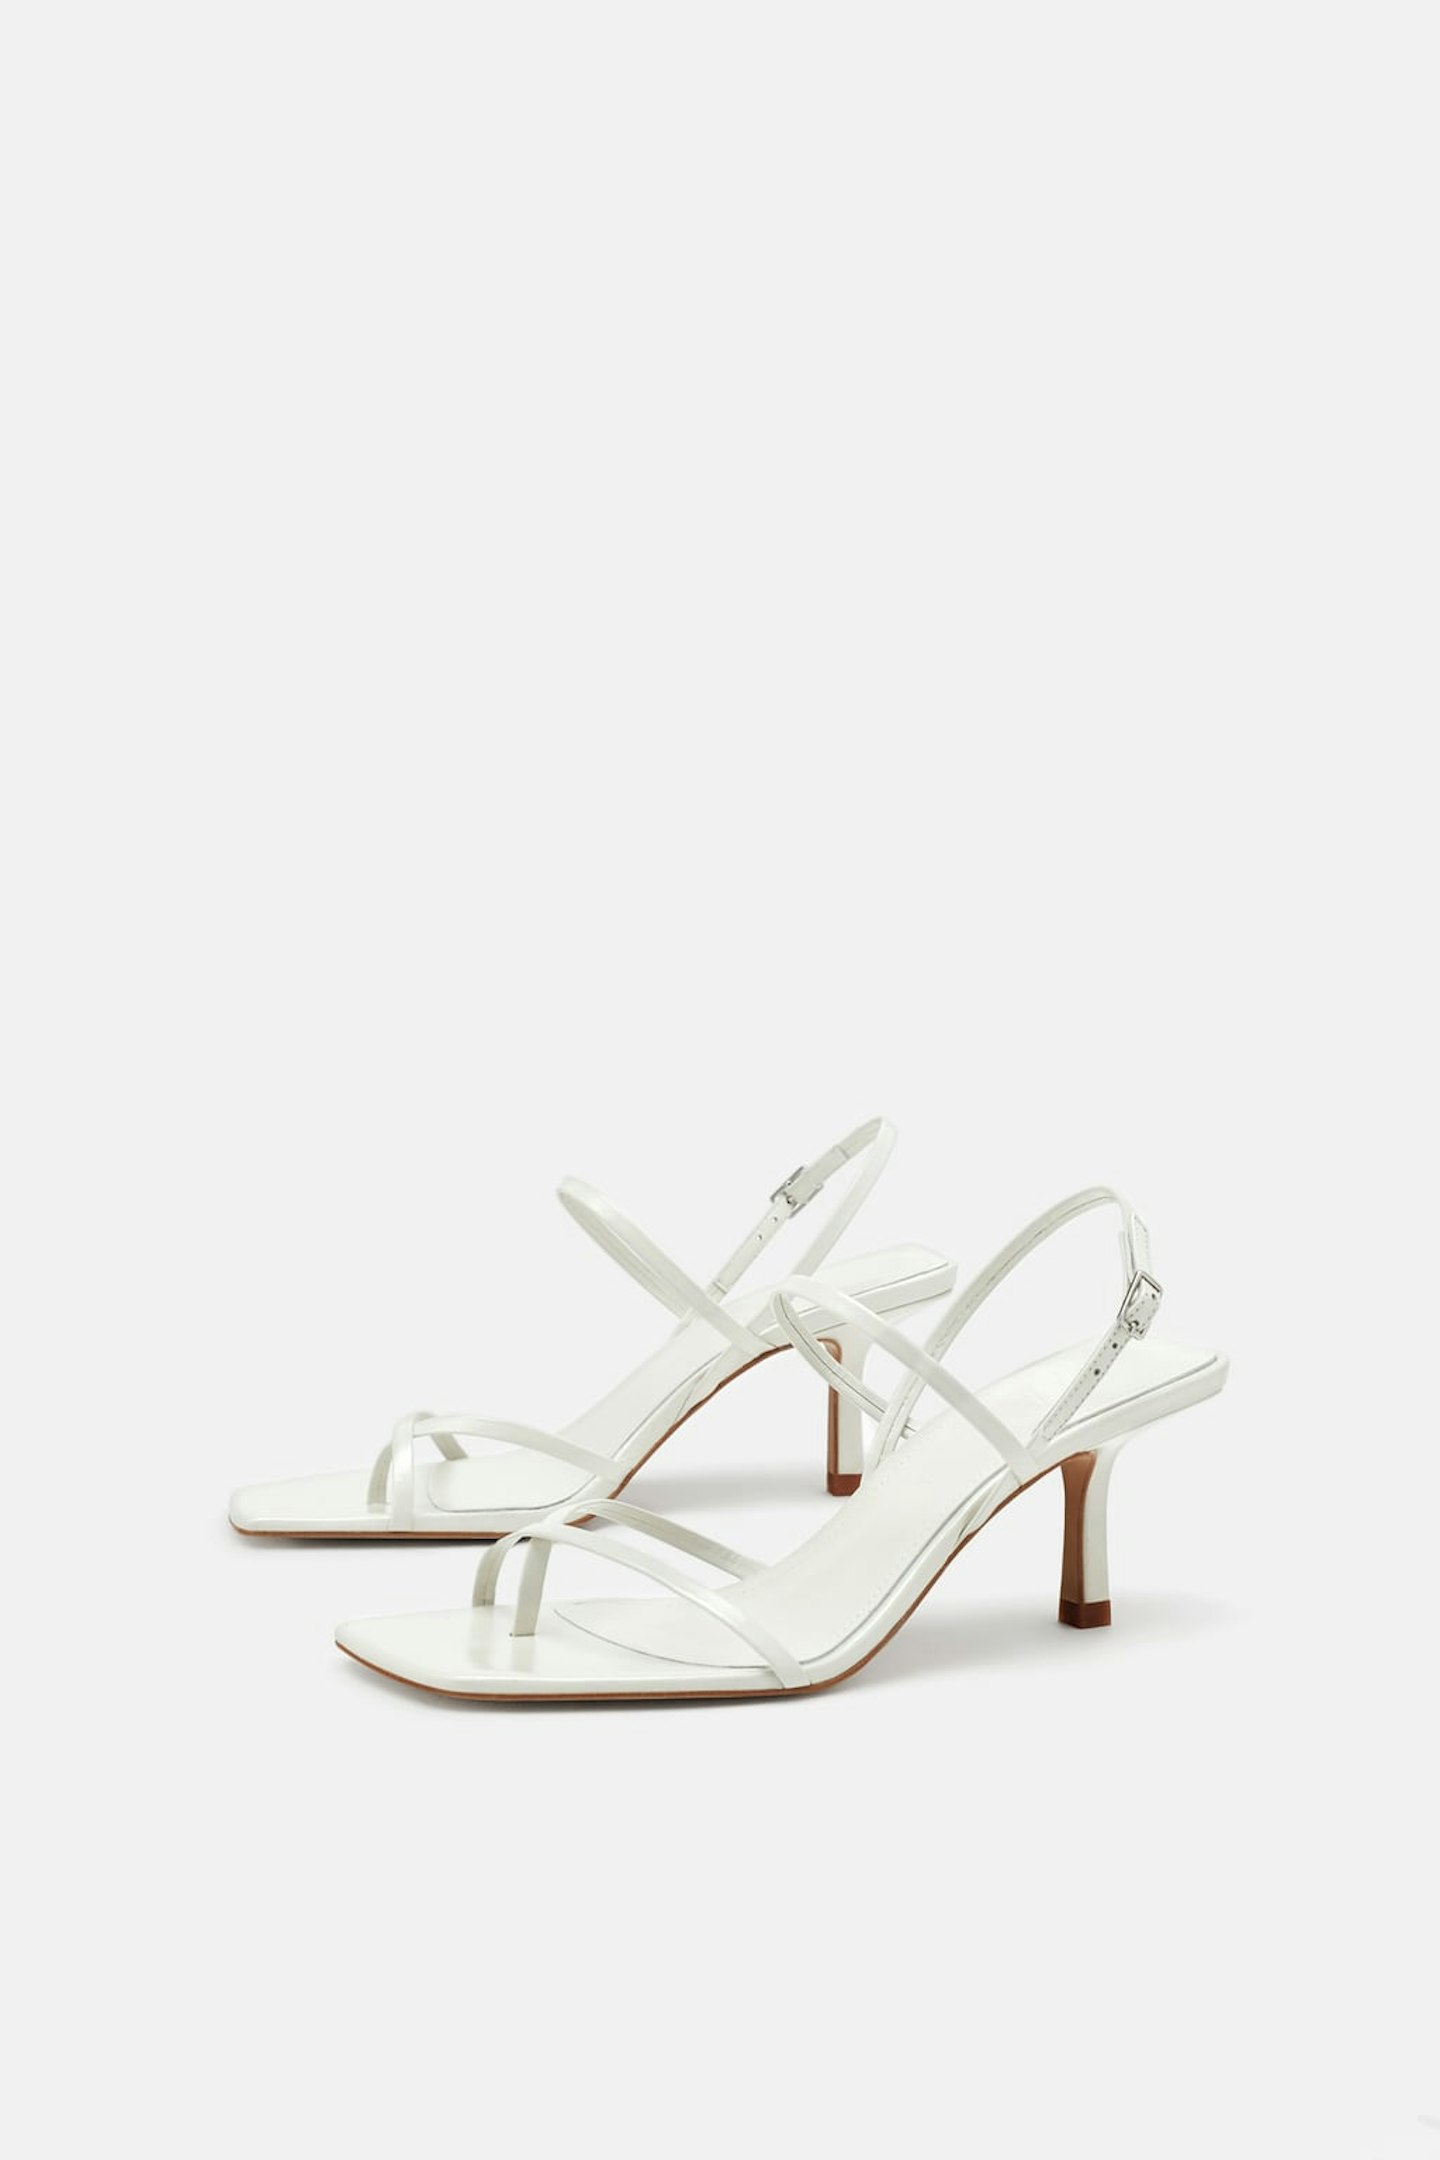 You need to buy a pair of square toe sandals